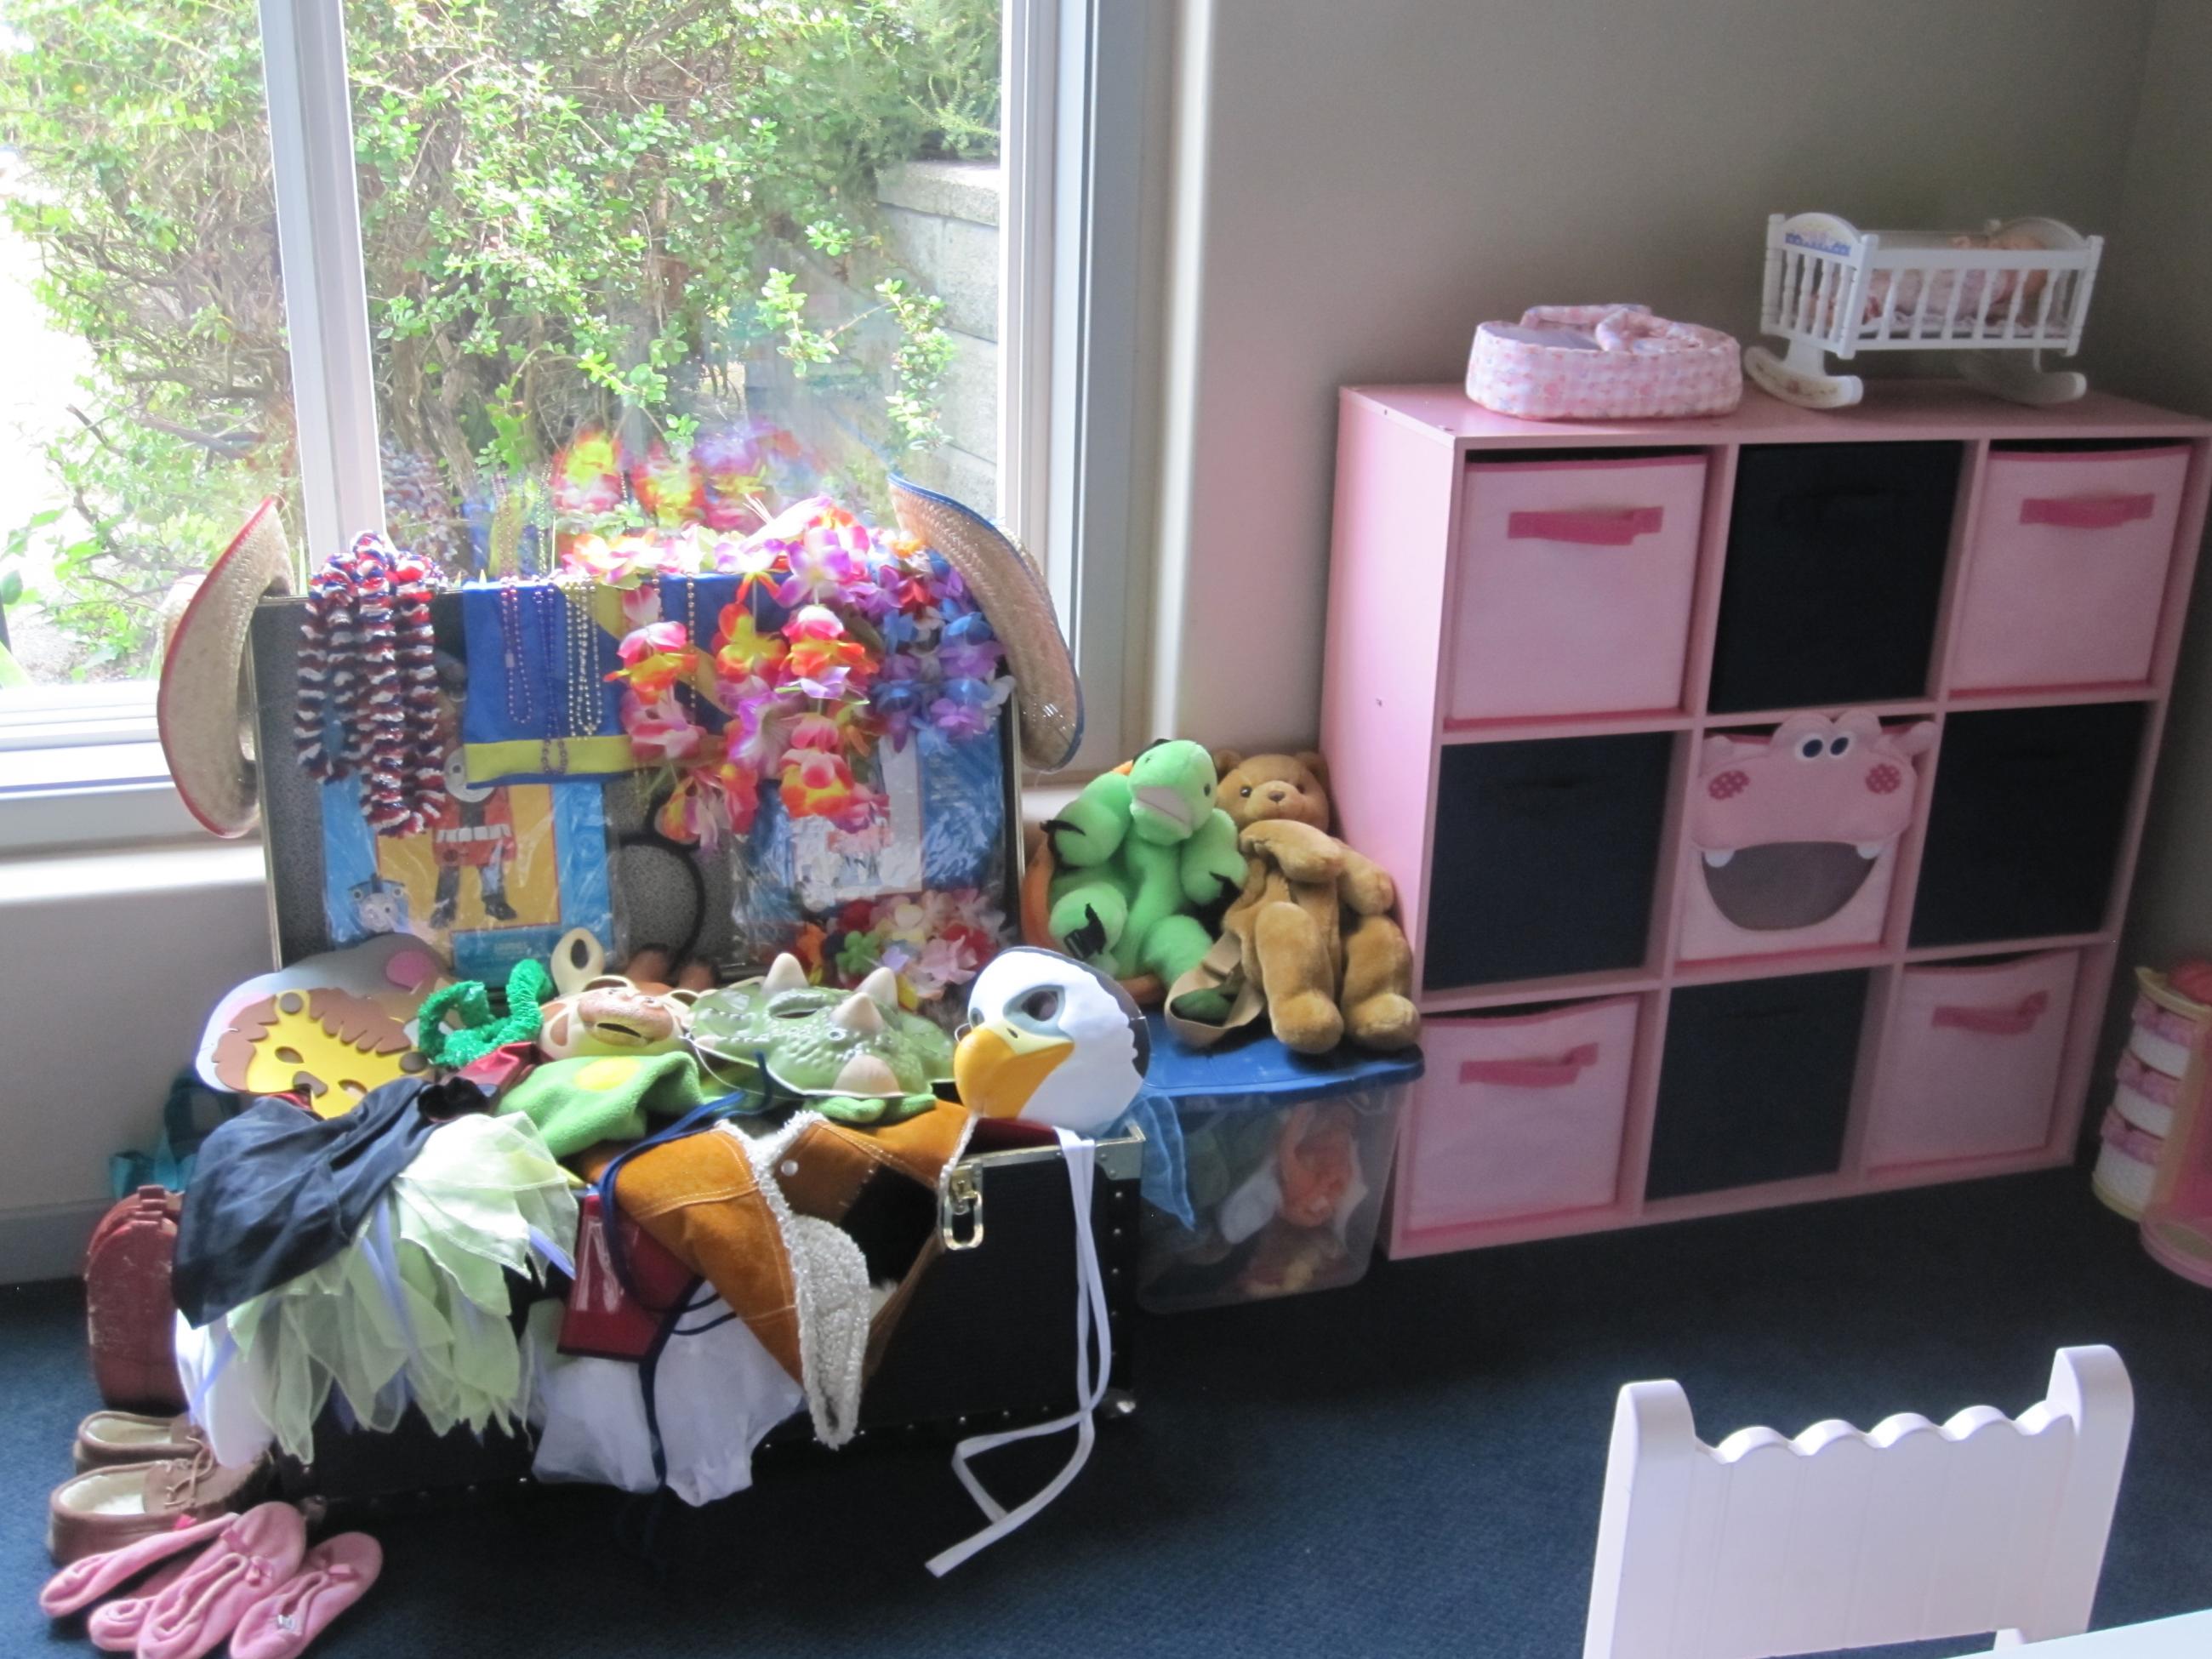 Dramatic play area with tons of dress-up items